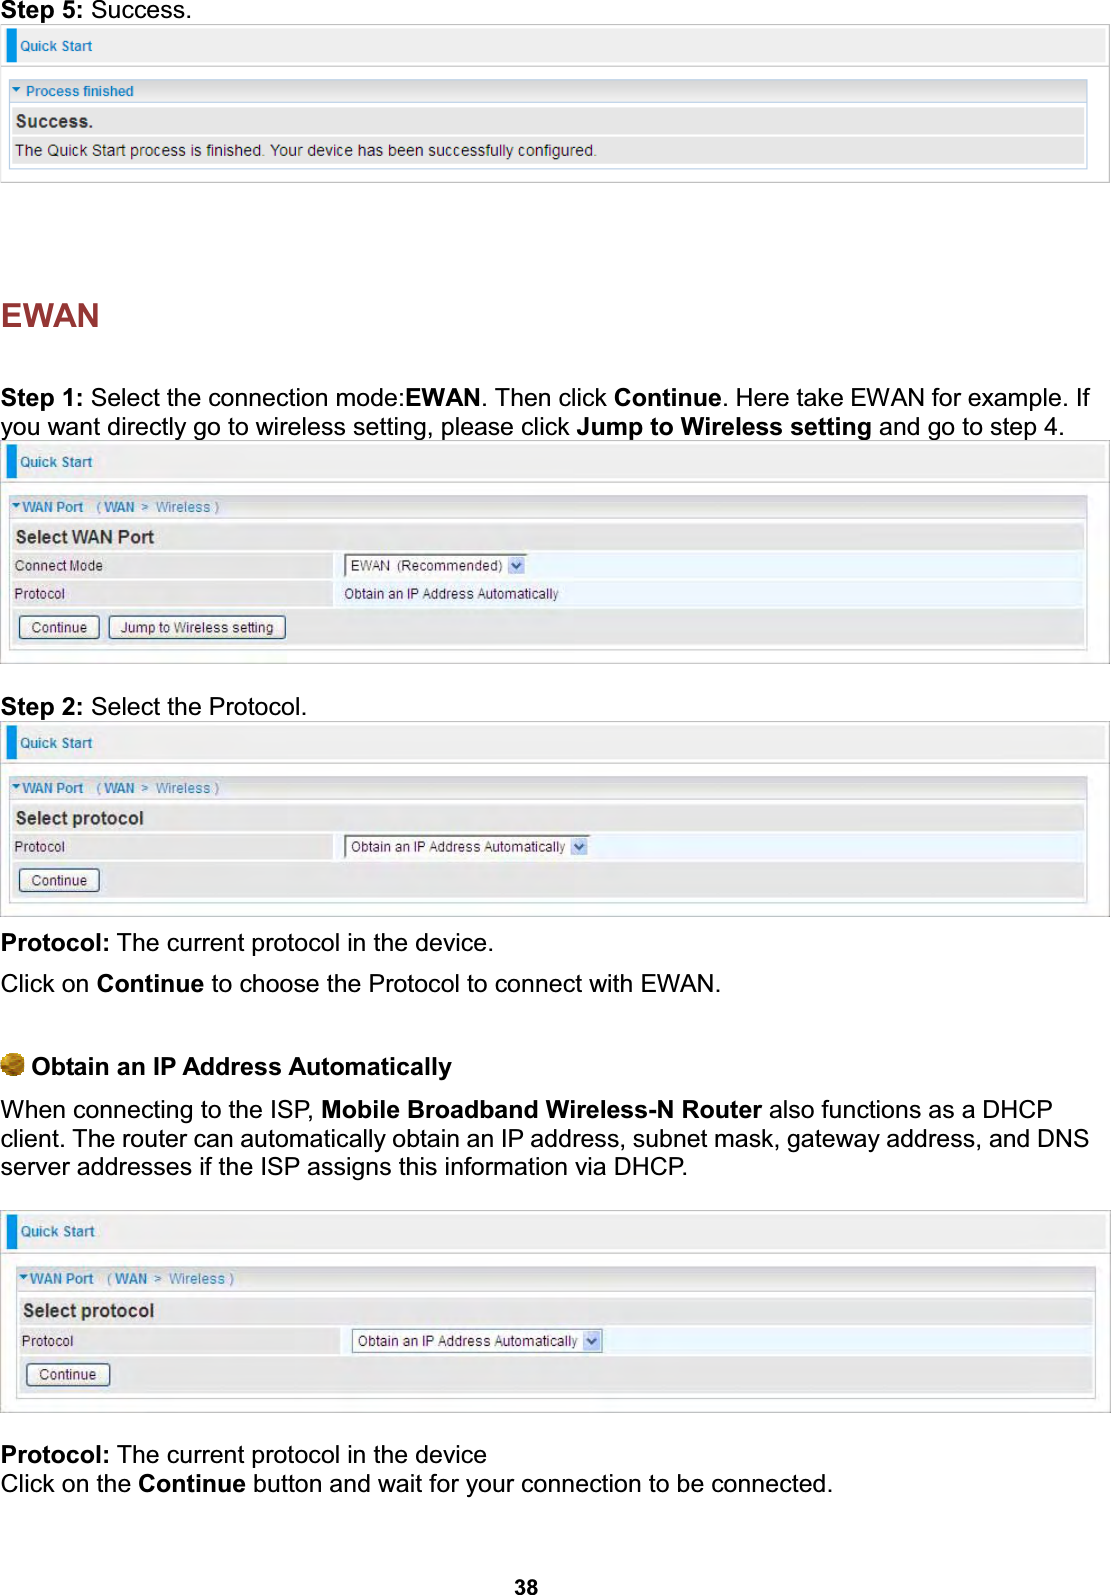  38  Step 5: Success.    EWAN   Step 1: Select the connection mode:EWAN. Then click Continue. Here take EWAN for example. If you want directly go to wireless setting, please click Jump to Wireless setting and go to step 4.   Step 2: Select the Protocol.  Protocol: The current protocol in the device.  Click on Continue to choose the Protocol to connect with EWAN.   Obtain an IP Address Automatically When connecting to the ISP, Mobile Broadband Wireless-N Router also functions as a DHCP client. The router can automatically obtain an IP address, subnet mask, gateway address, and DNS server addresses if the ISP assigns this information via DHCP.    Protocol: The current protocol in the device  Click on the Continue button and wait for your connection to be connected.  